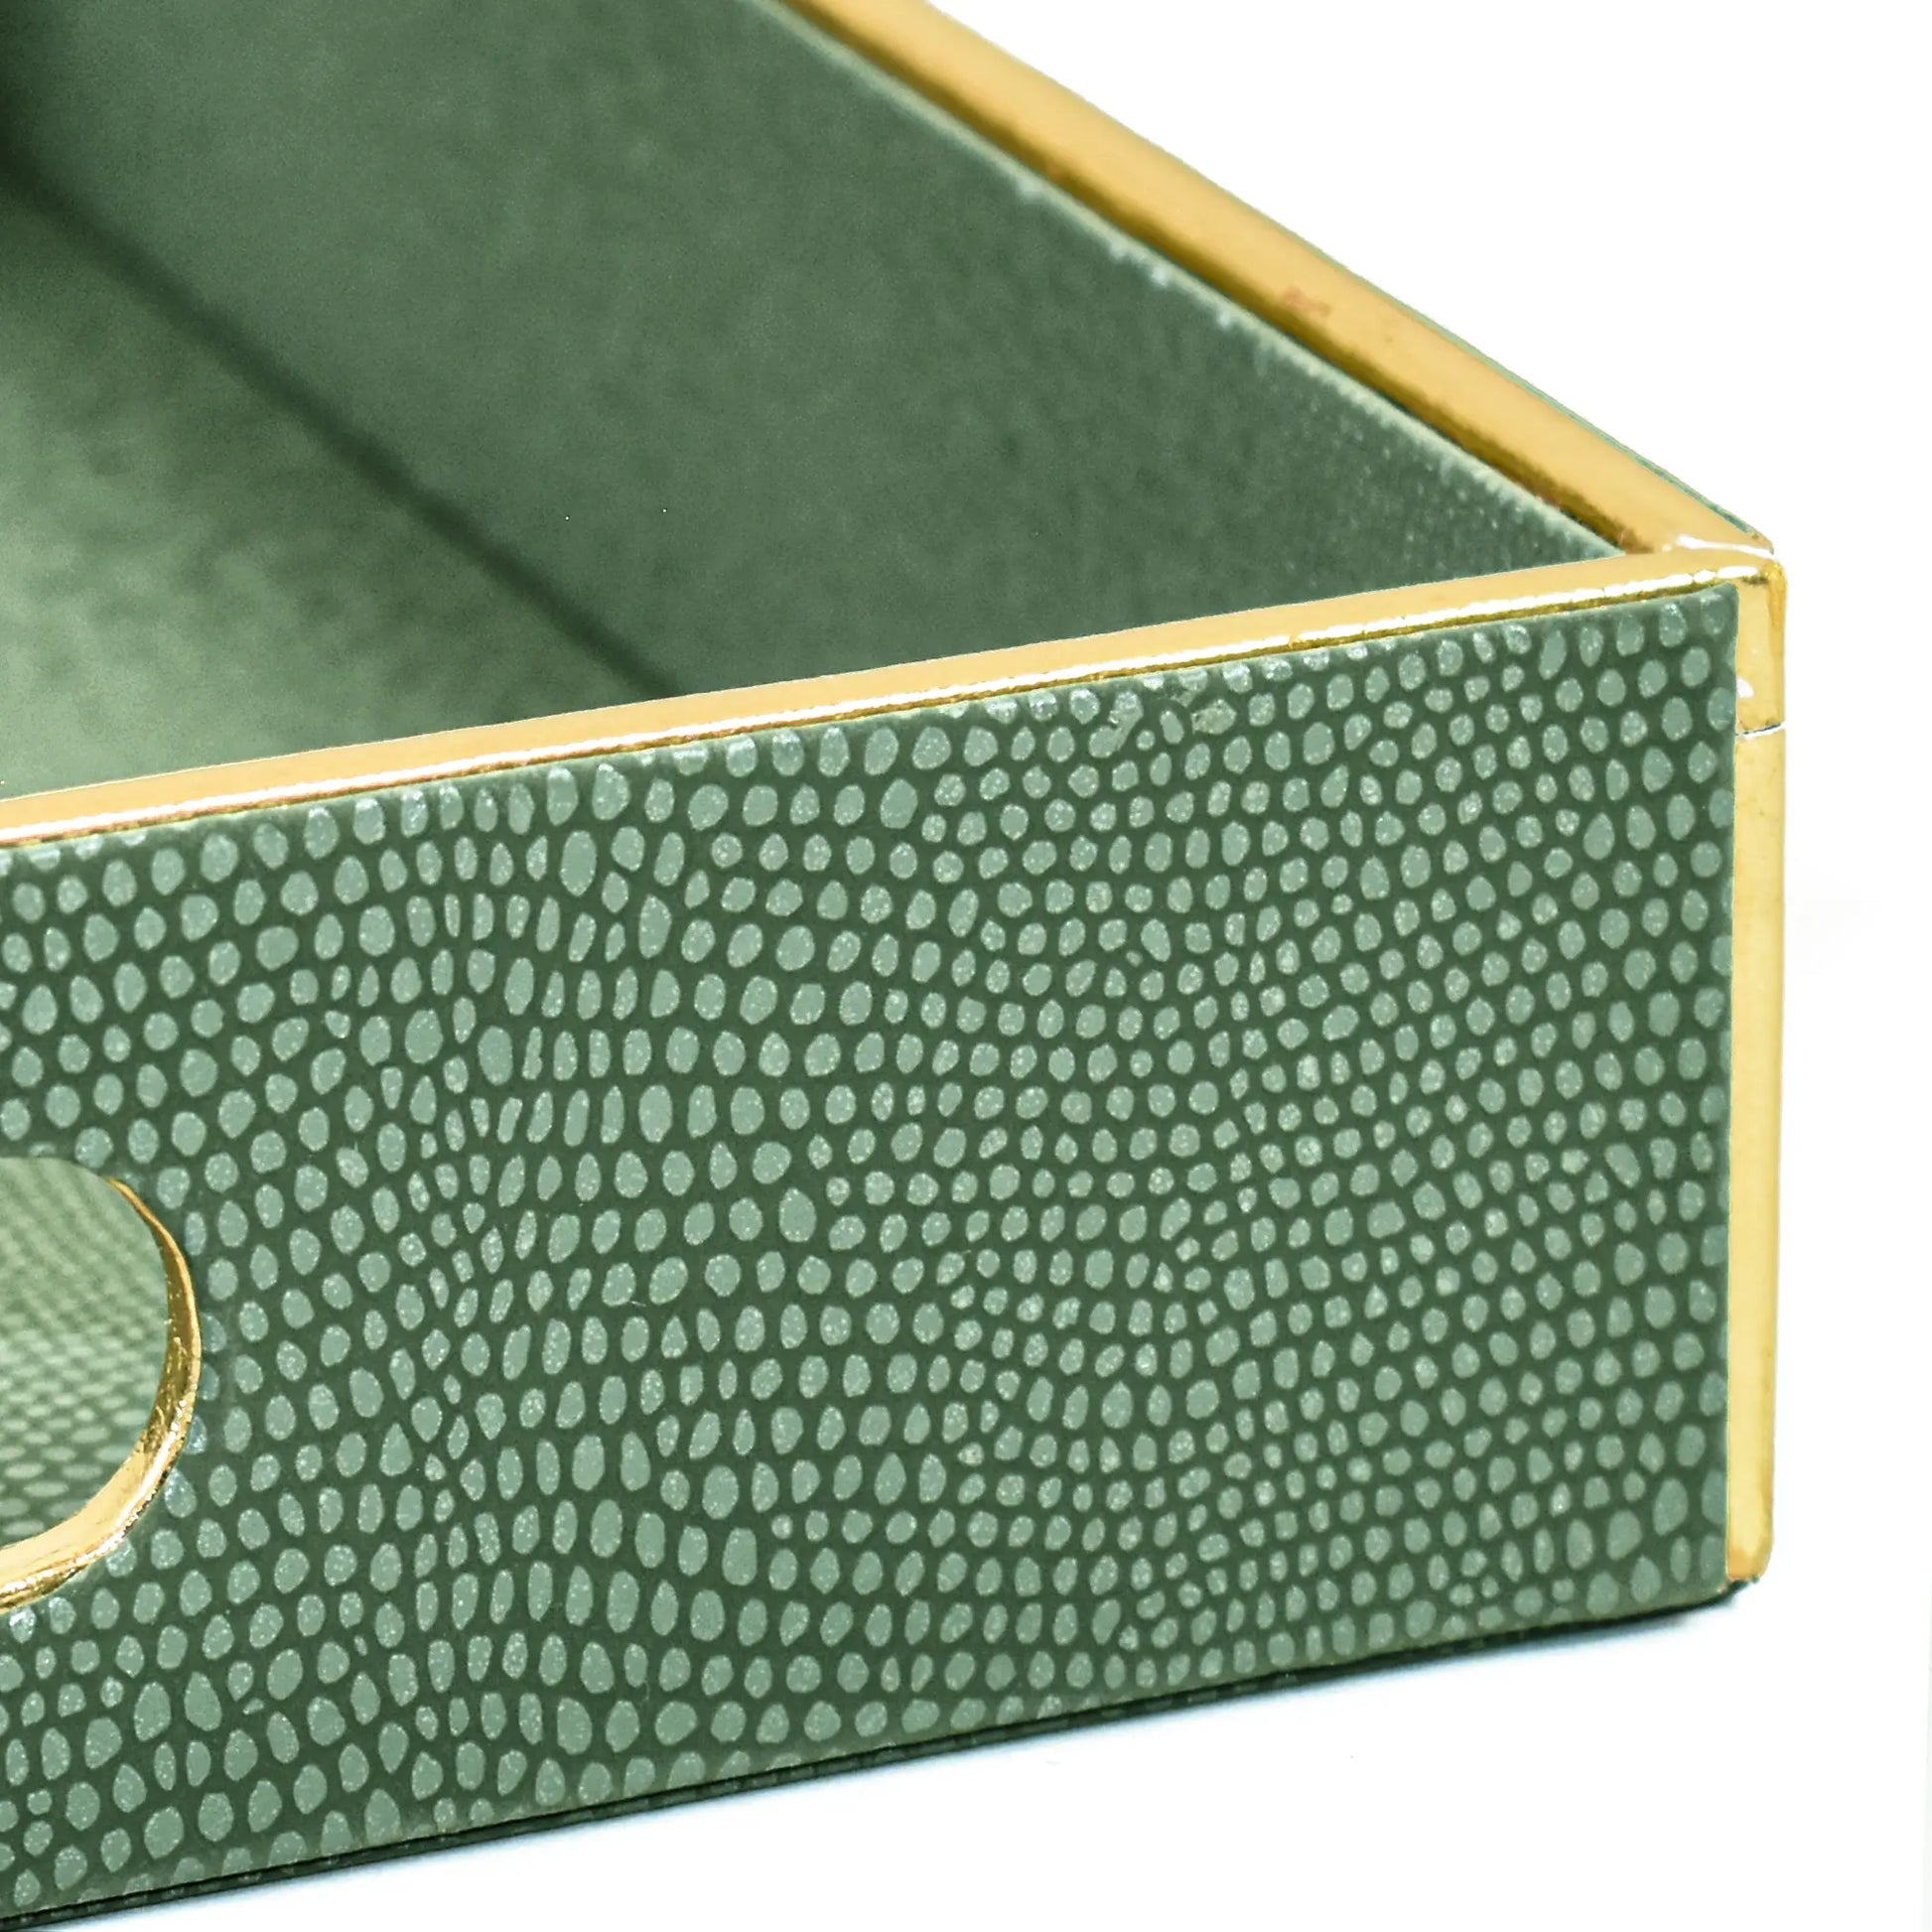 Leatherette Square Serving Tray Large | Olive green | Serpentine Ichkan